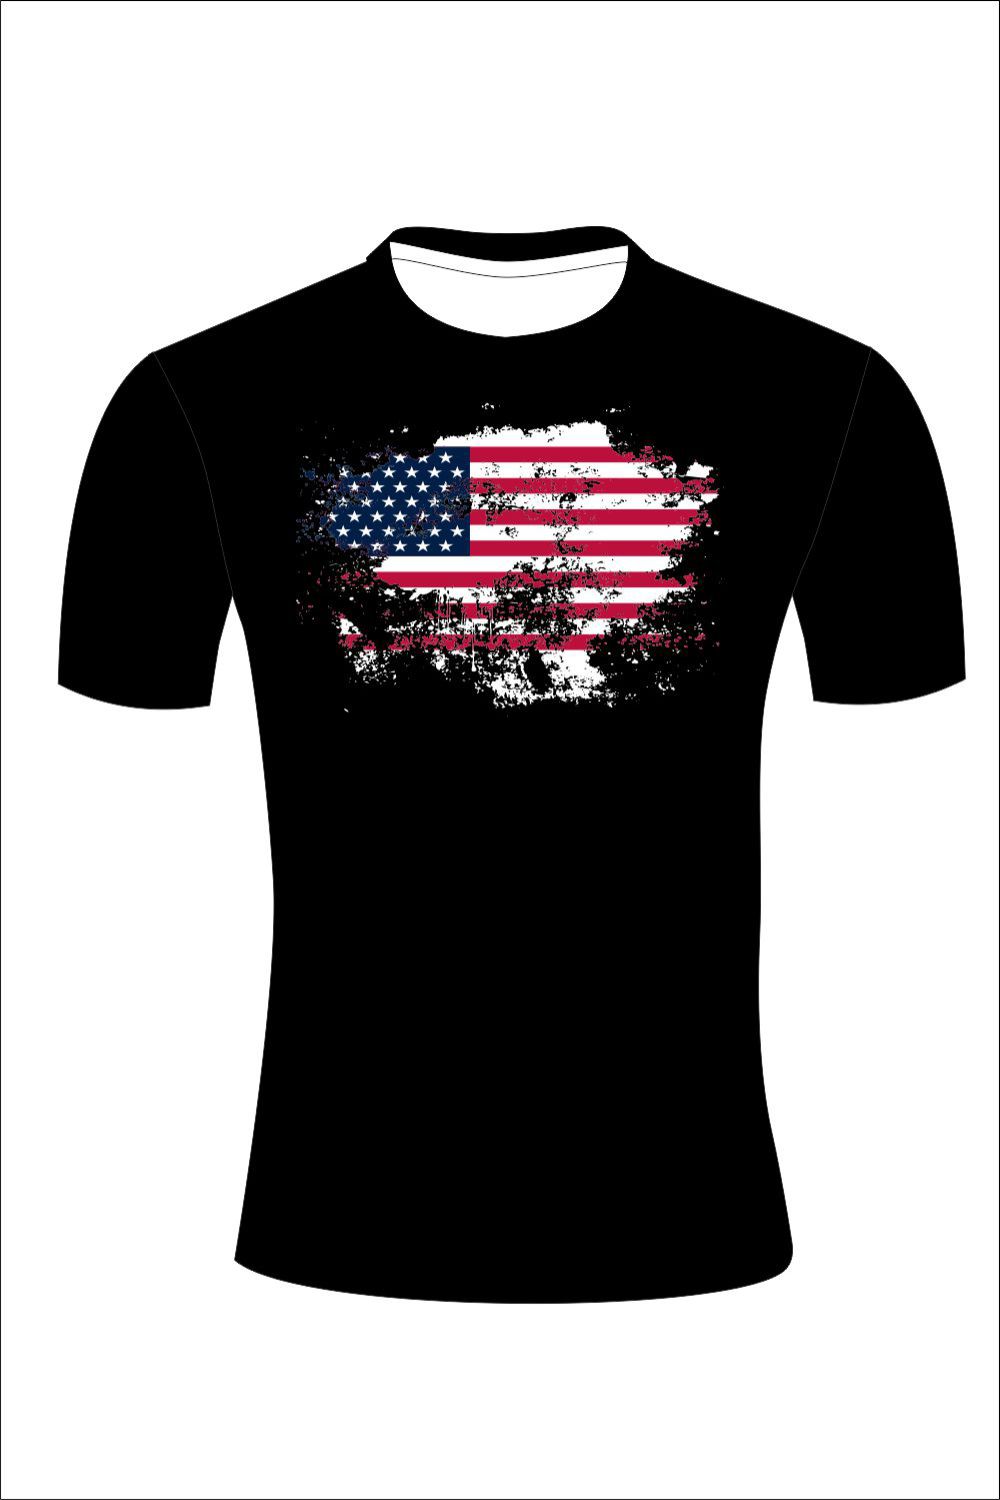 Black shirt with an american flag on it.